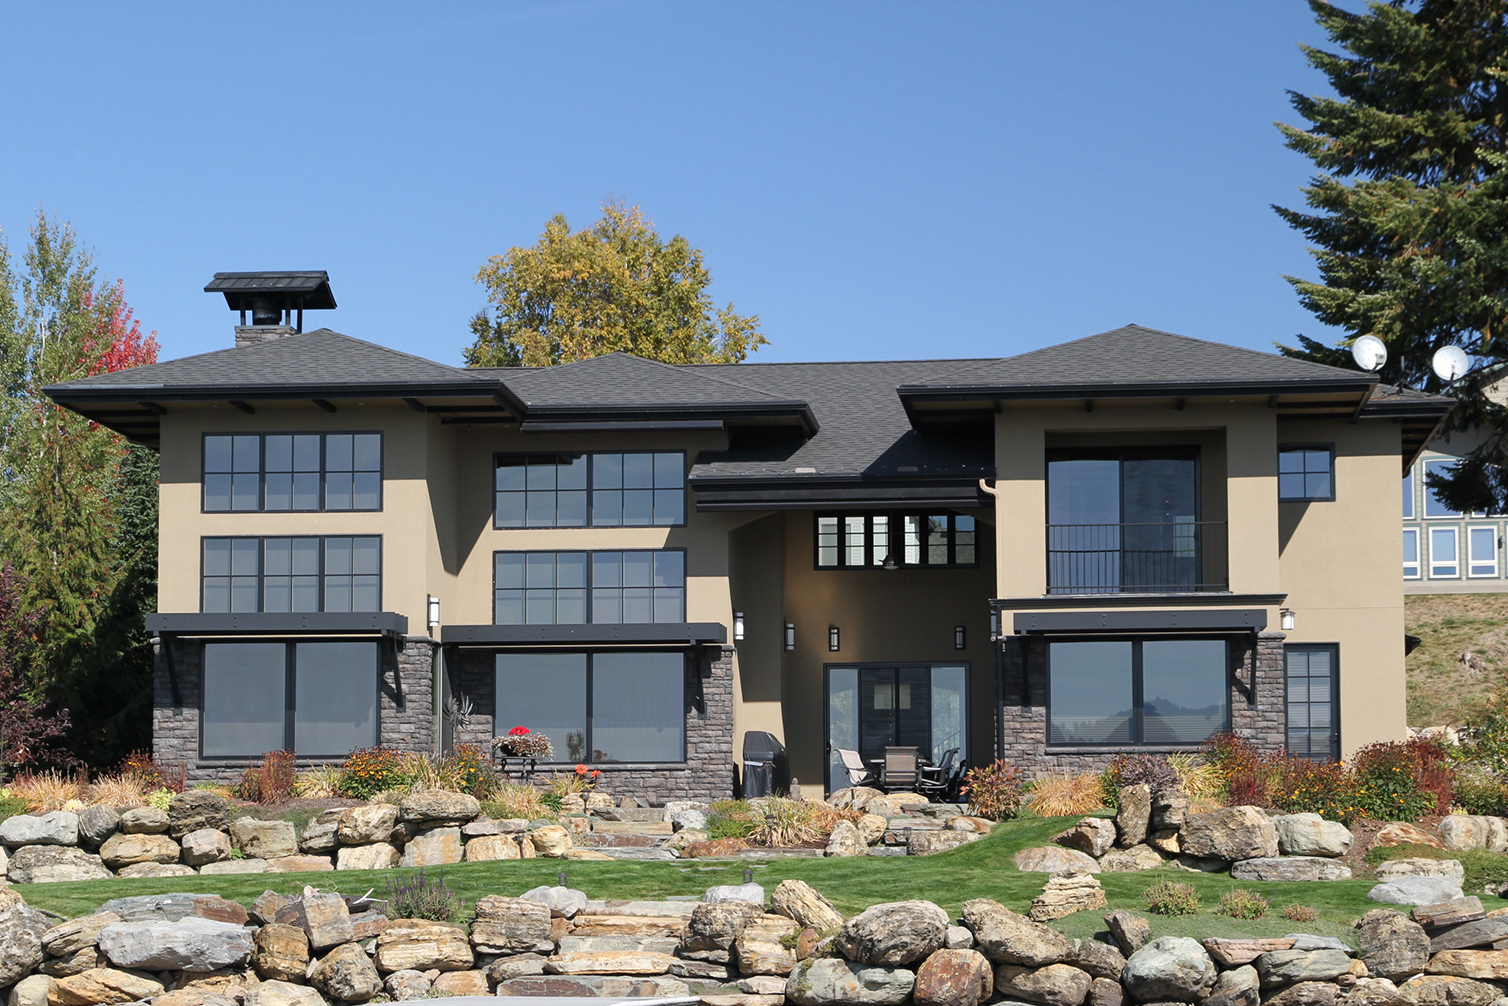 Sandpoint Builders, Inc. builds custom dream homes in North Idaho background image.